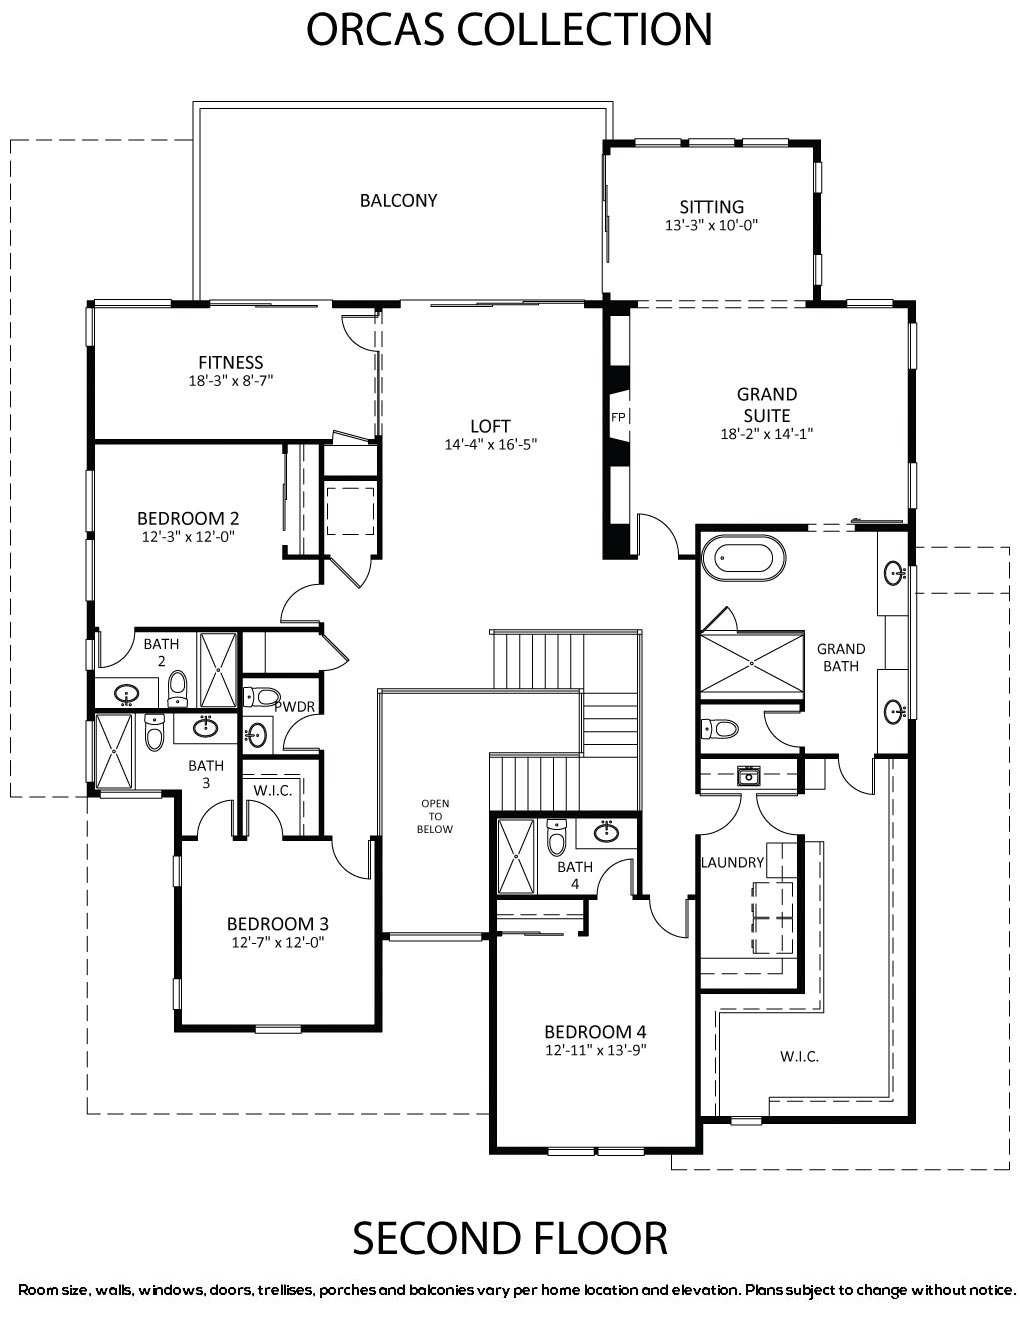 Homesite 3 Orcas Collection Second Floor